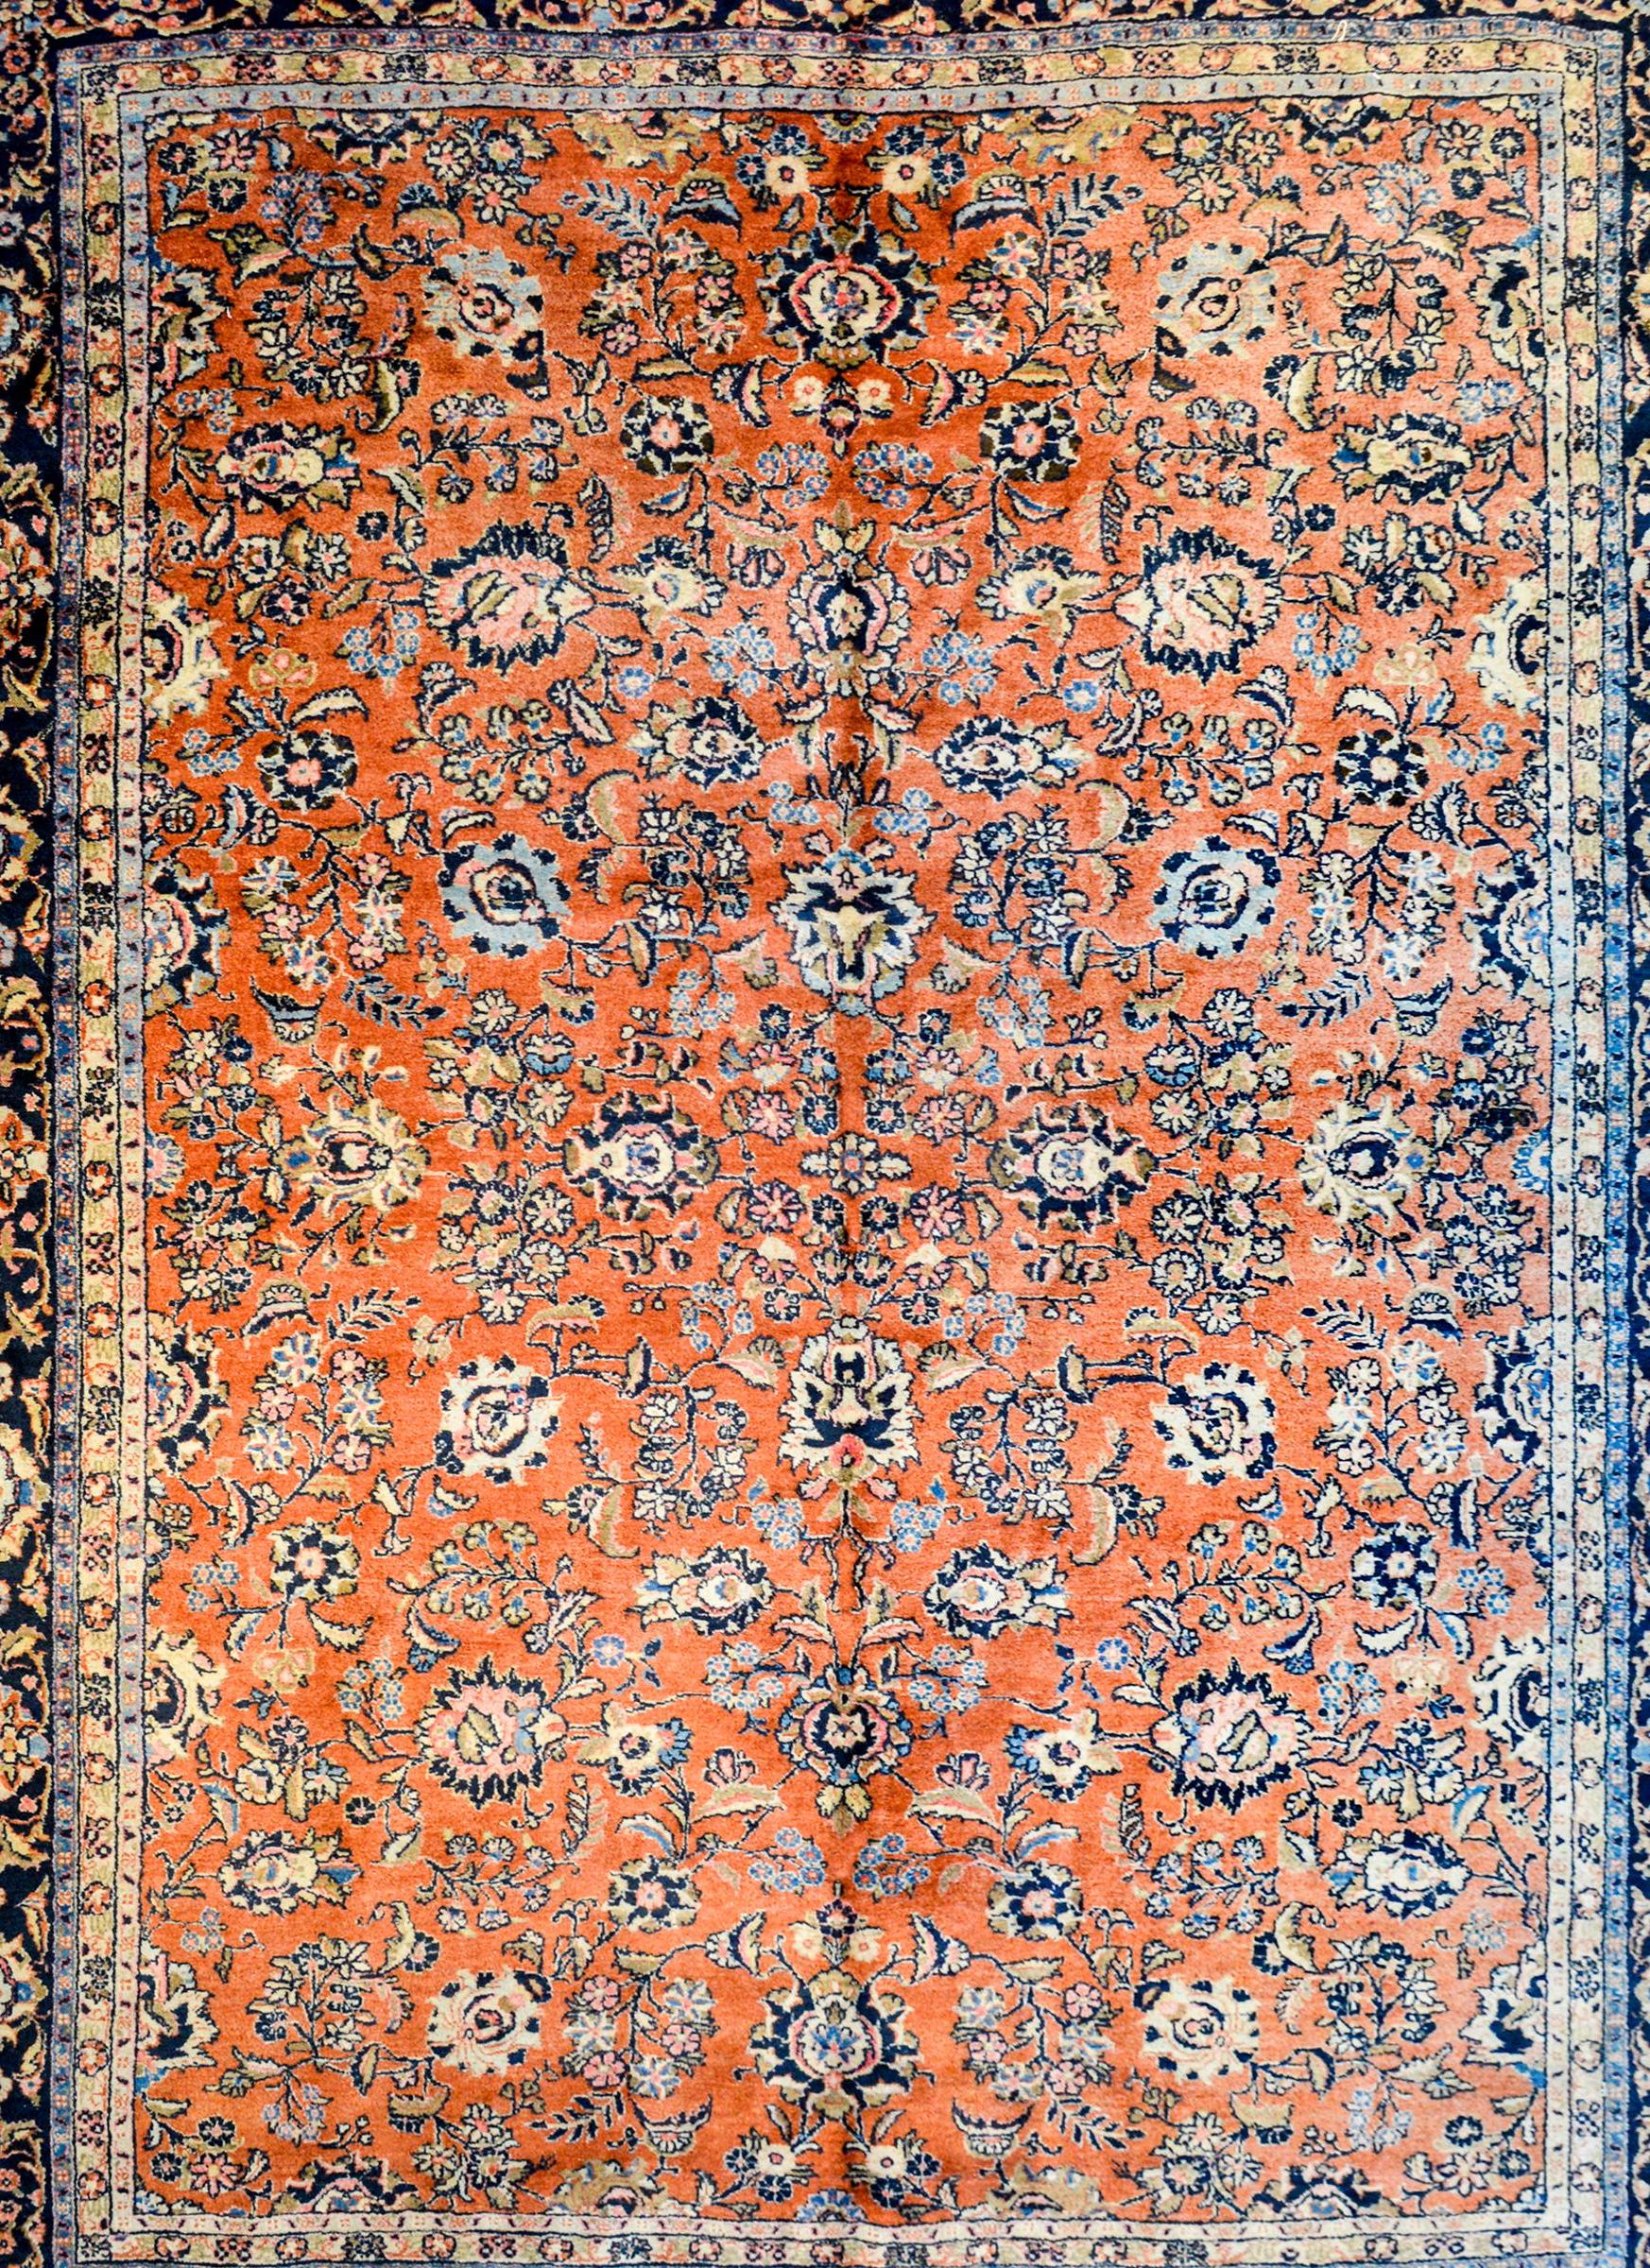 1950s Persian Qazvin rug with an all-over abstract floral pattern woven in light and dark indigo, green, gold, and cream, on a burnt orange colored background. The border is wonderful, with a wide central stripe with a large-scale floral and